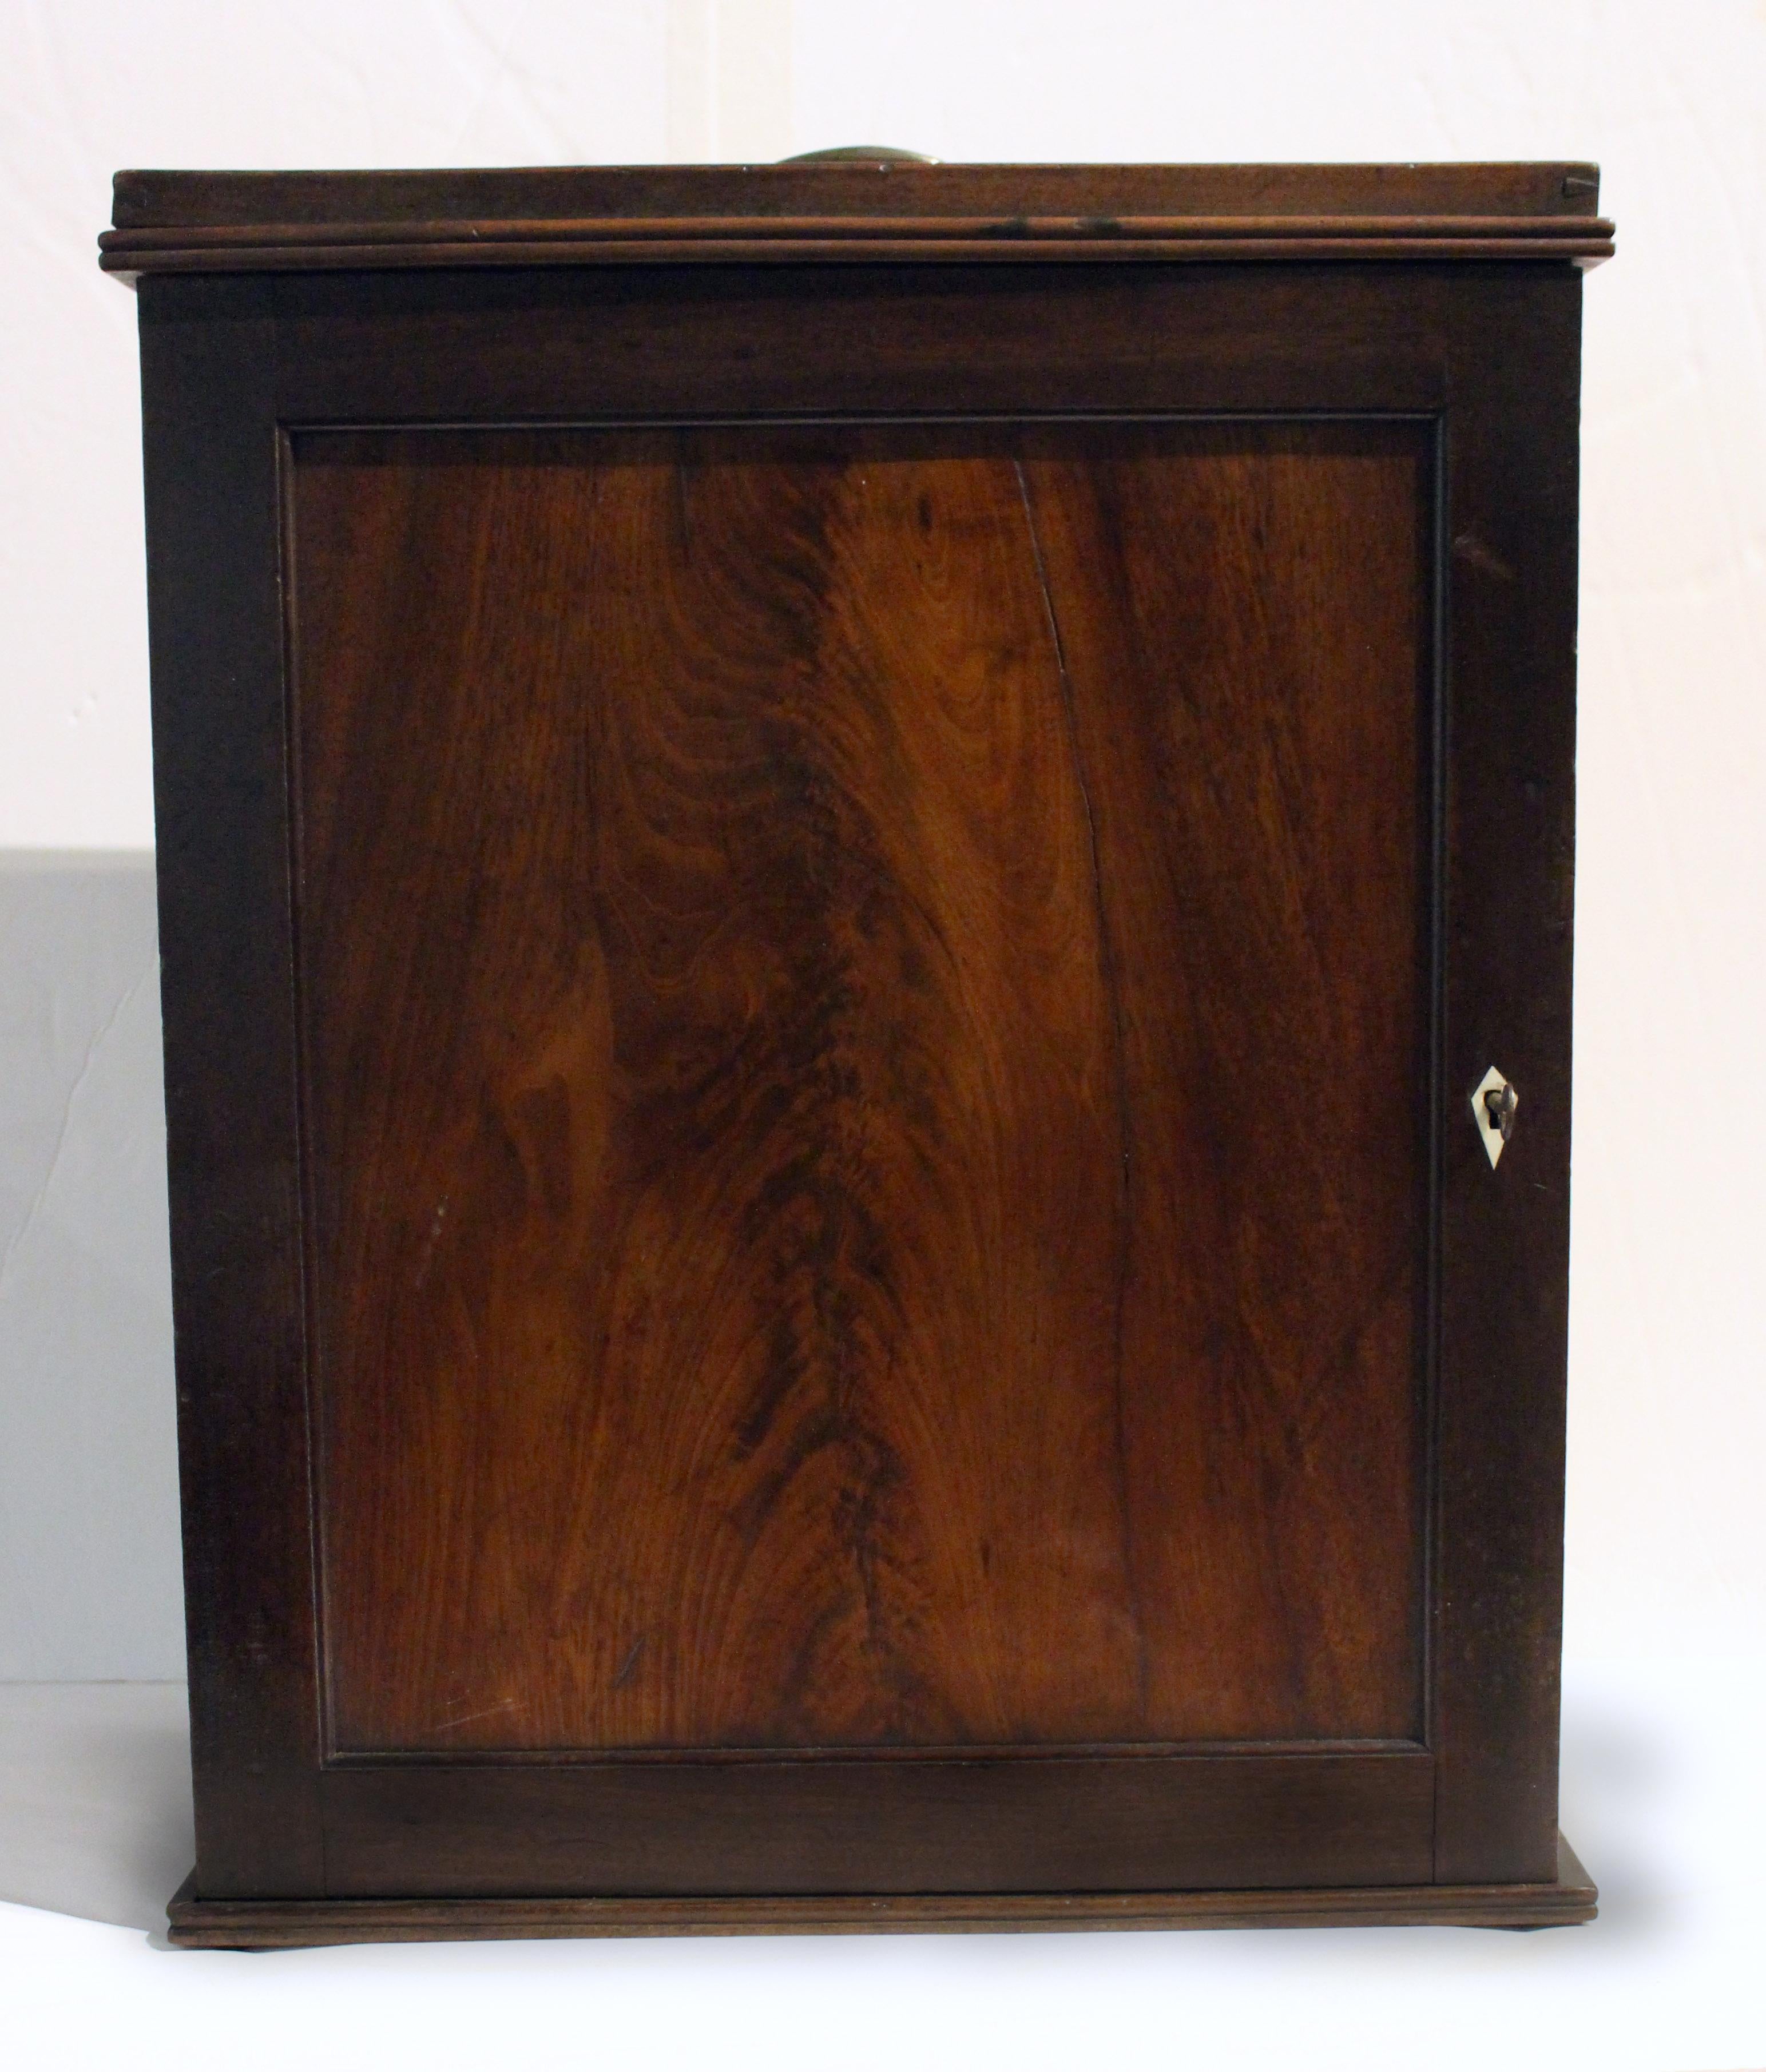 Circa 1780 small Georgian portable table-top cabinet box. Flame mahogany door. Robust brass bail & rosette handle on galleried top. Four interior shelves. Designed for unknown purpose. Could be used as a small end table for a chair. 17 1/8